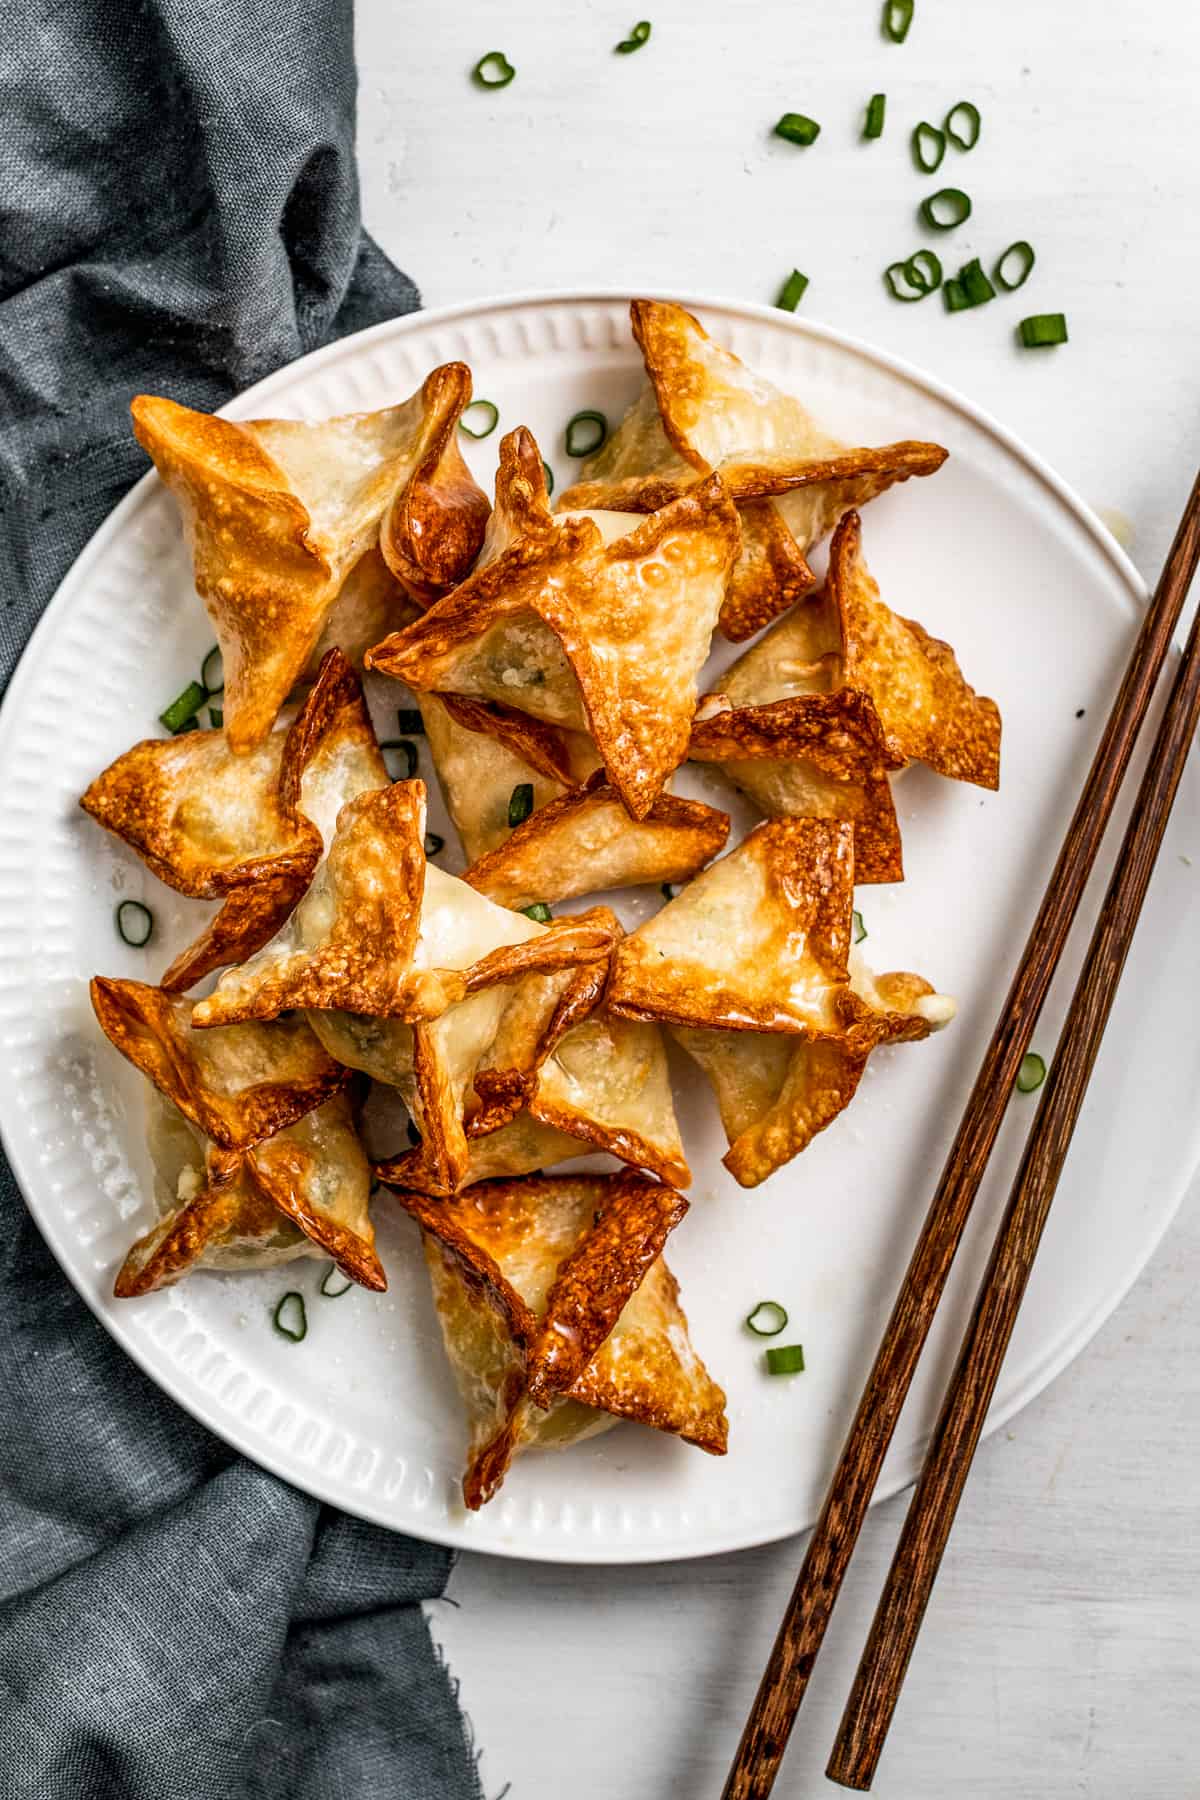 Crab rangoon on a white plate garnished with green onions and a pair of chopsticks placed next to the rangoons.